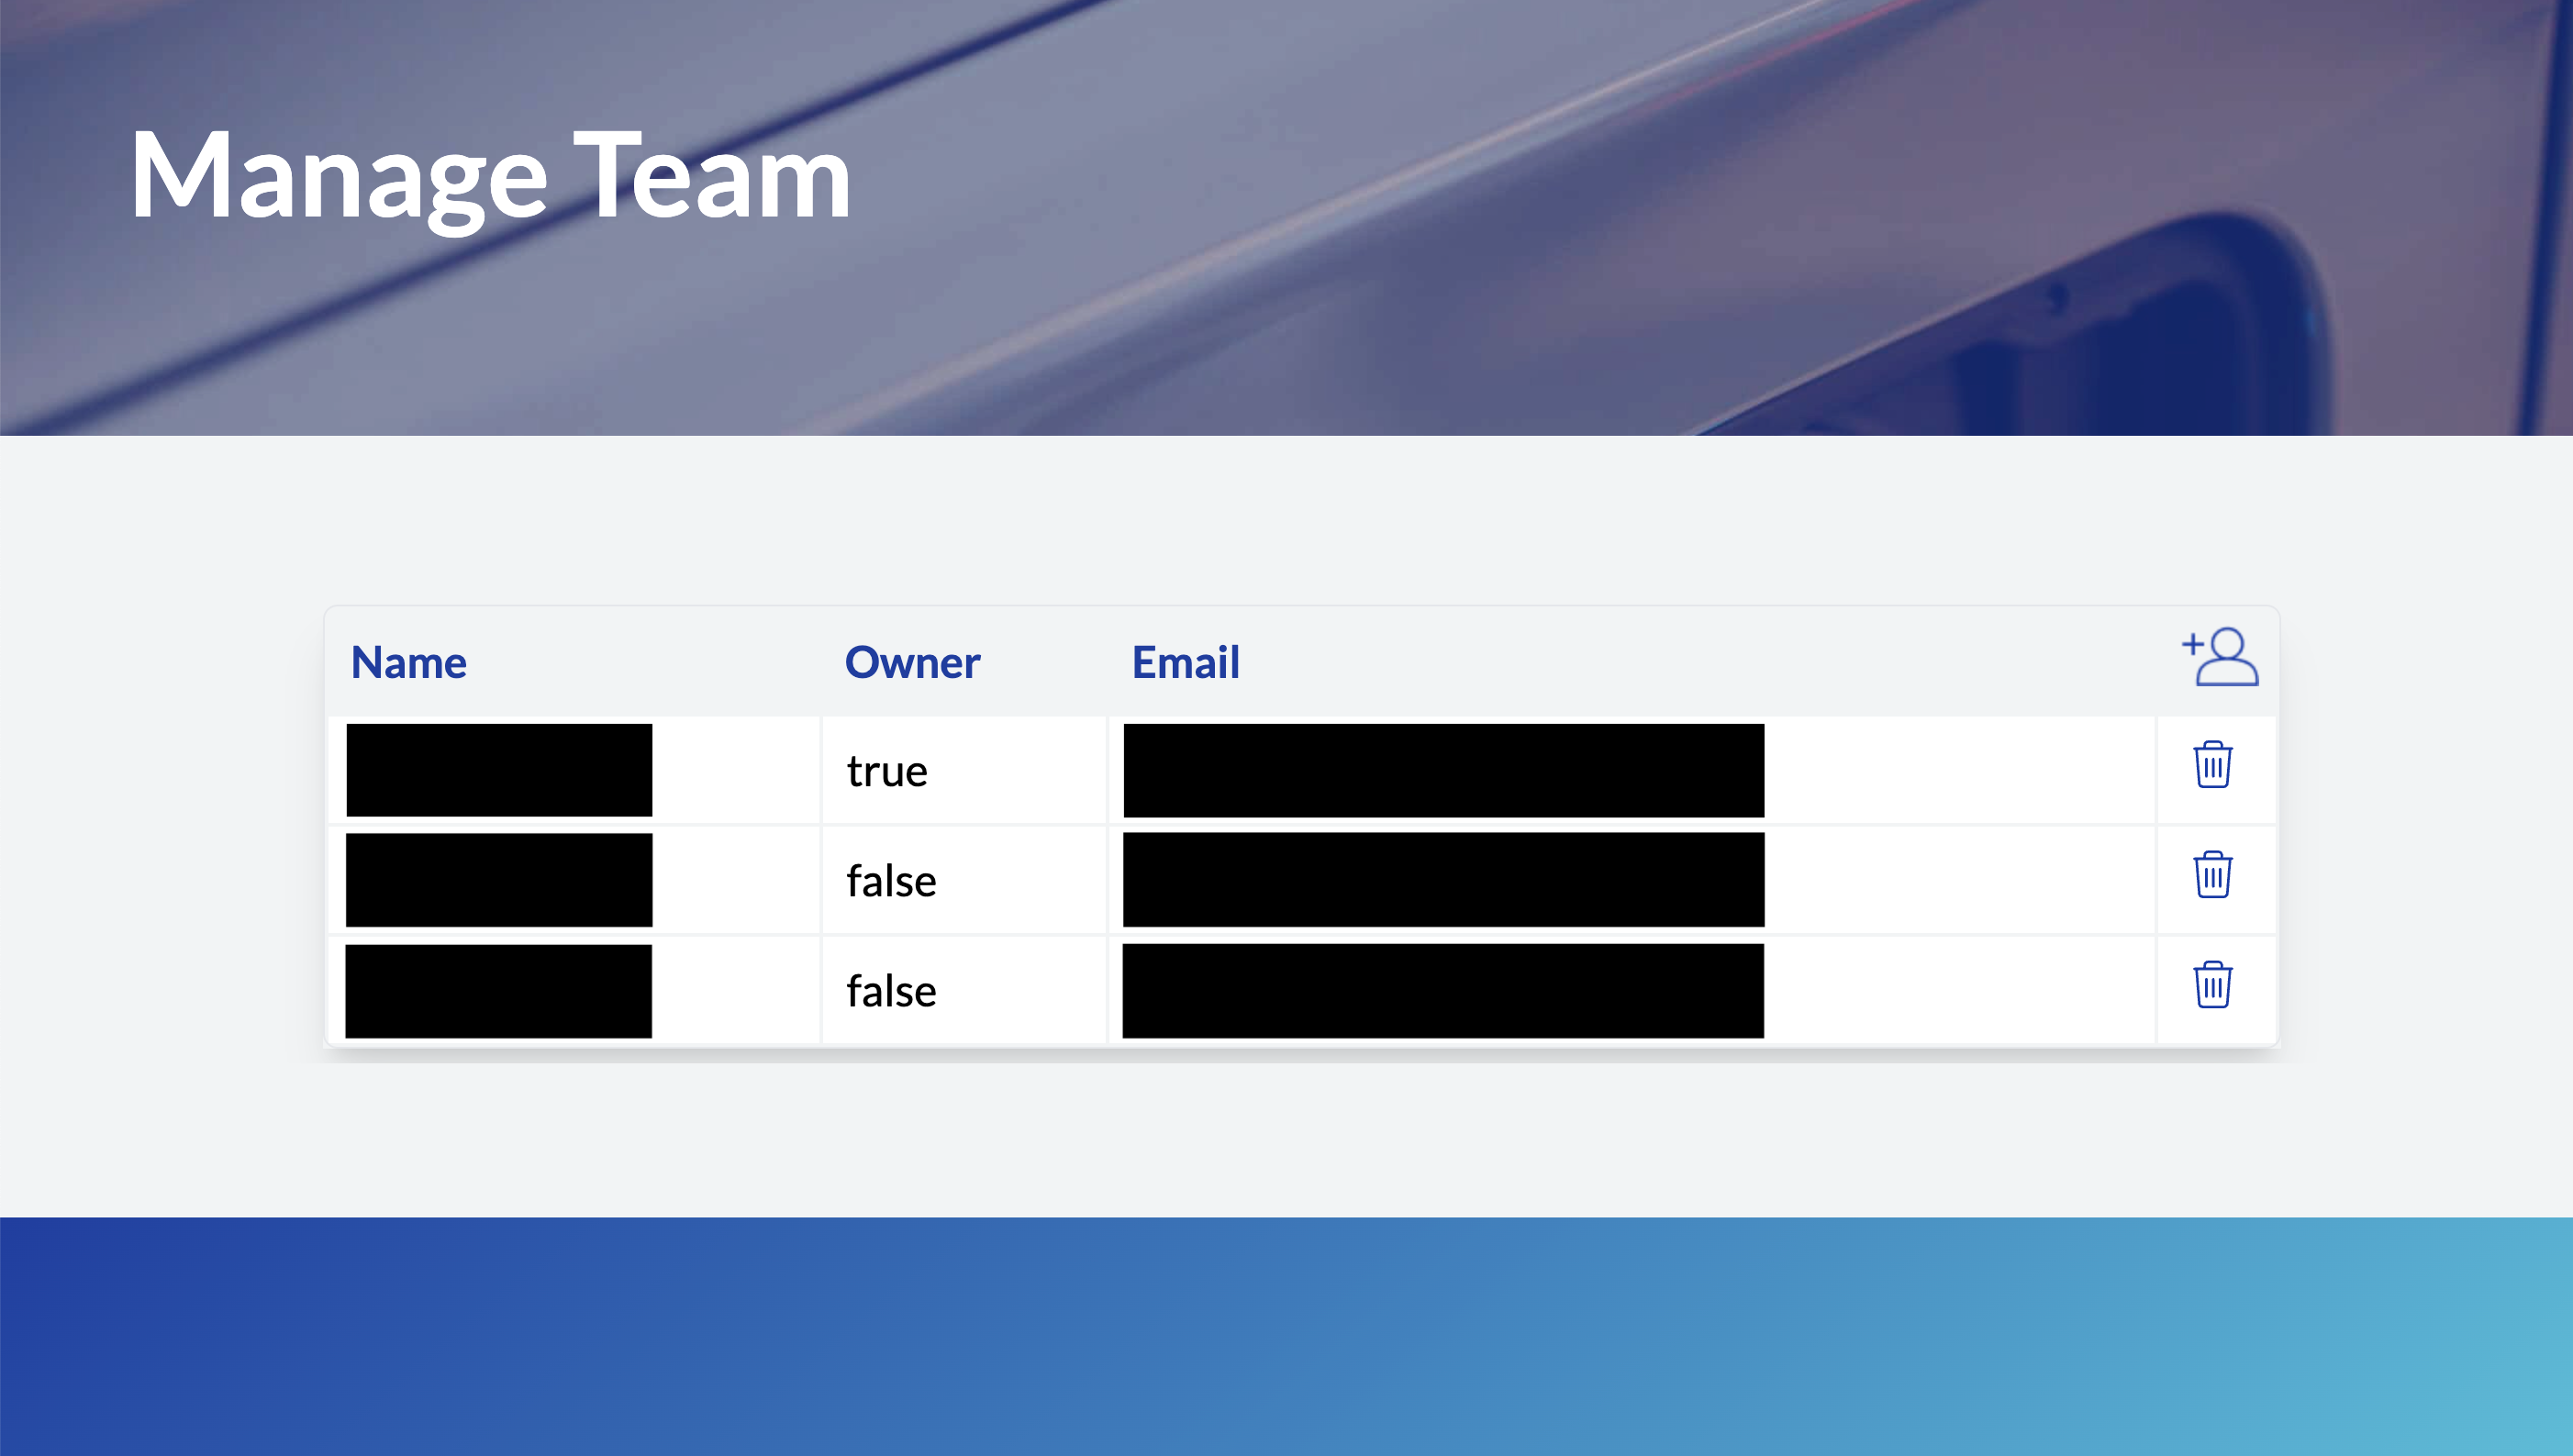 Manage Team page in the partner portal